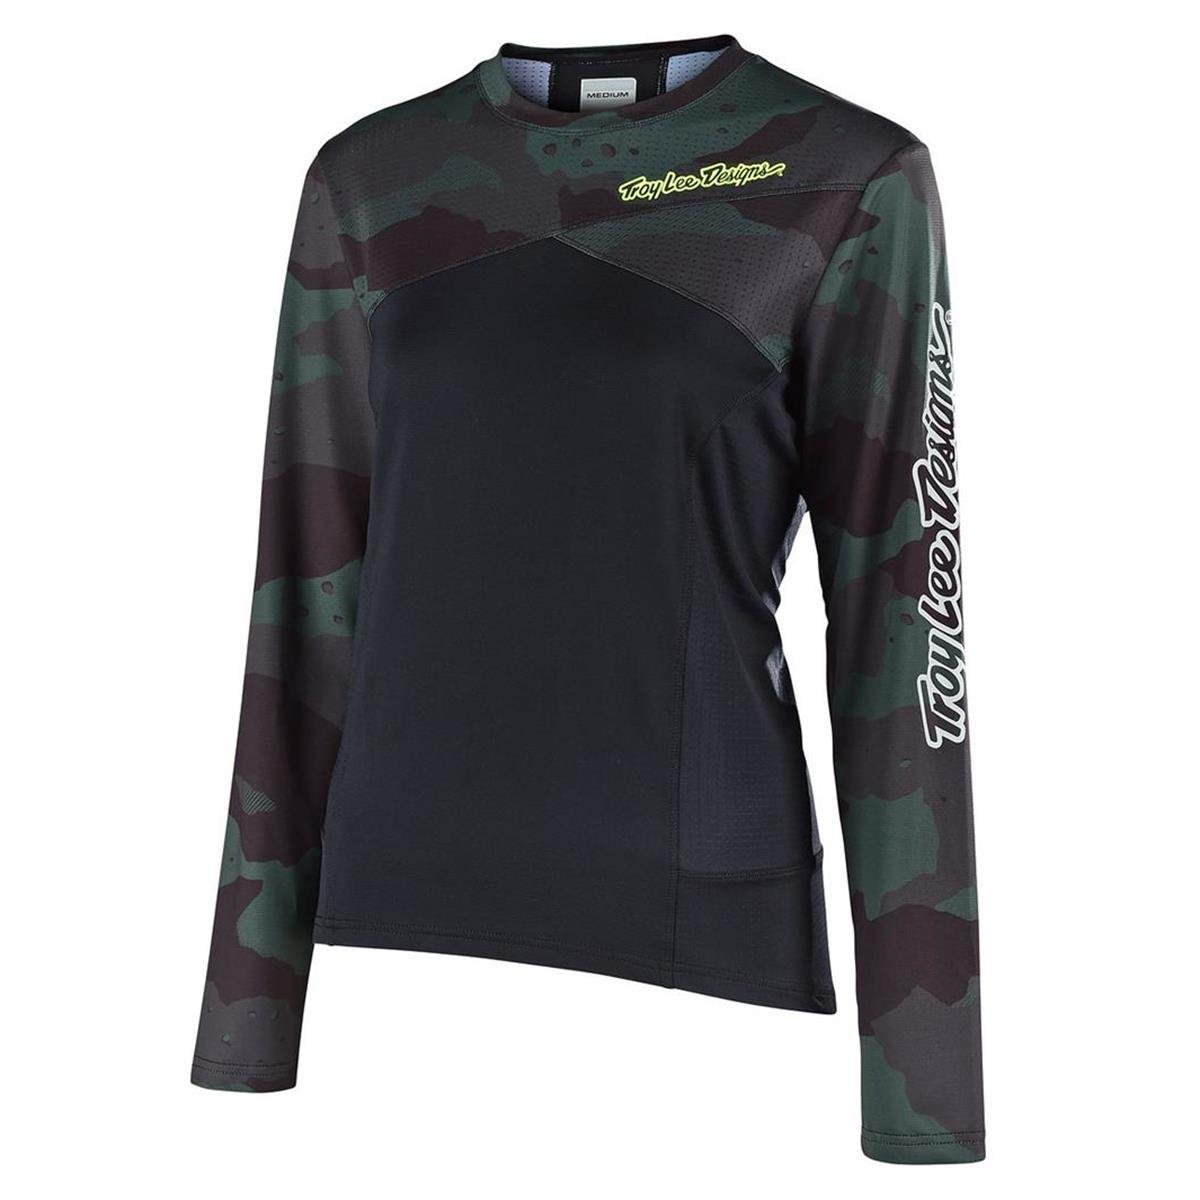 Troy Lee Designs Femme Maillot VTT Manches Longues Skyline Camo Green/Black